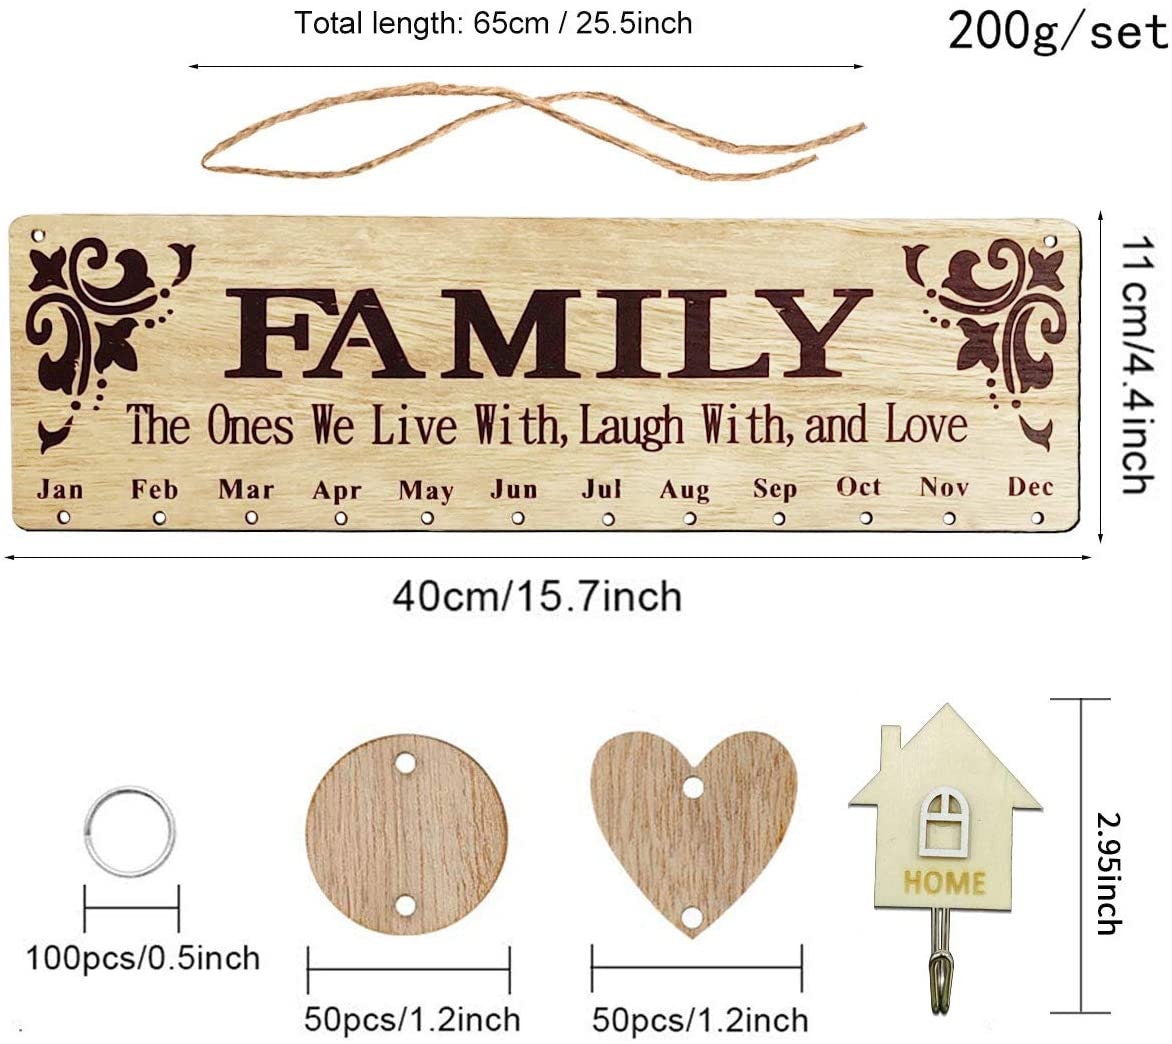 Wooden Family birthday reminder plaque calendar wall hanging | Etsy